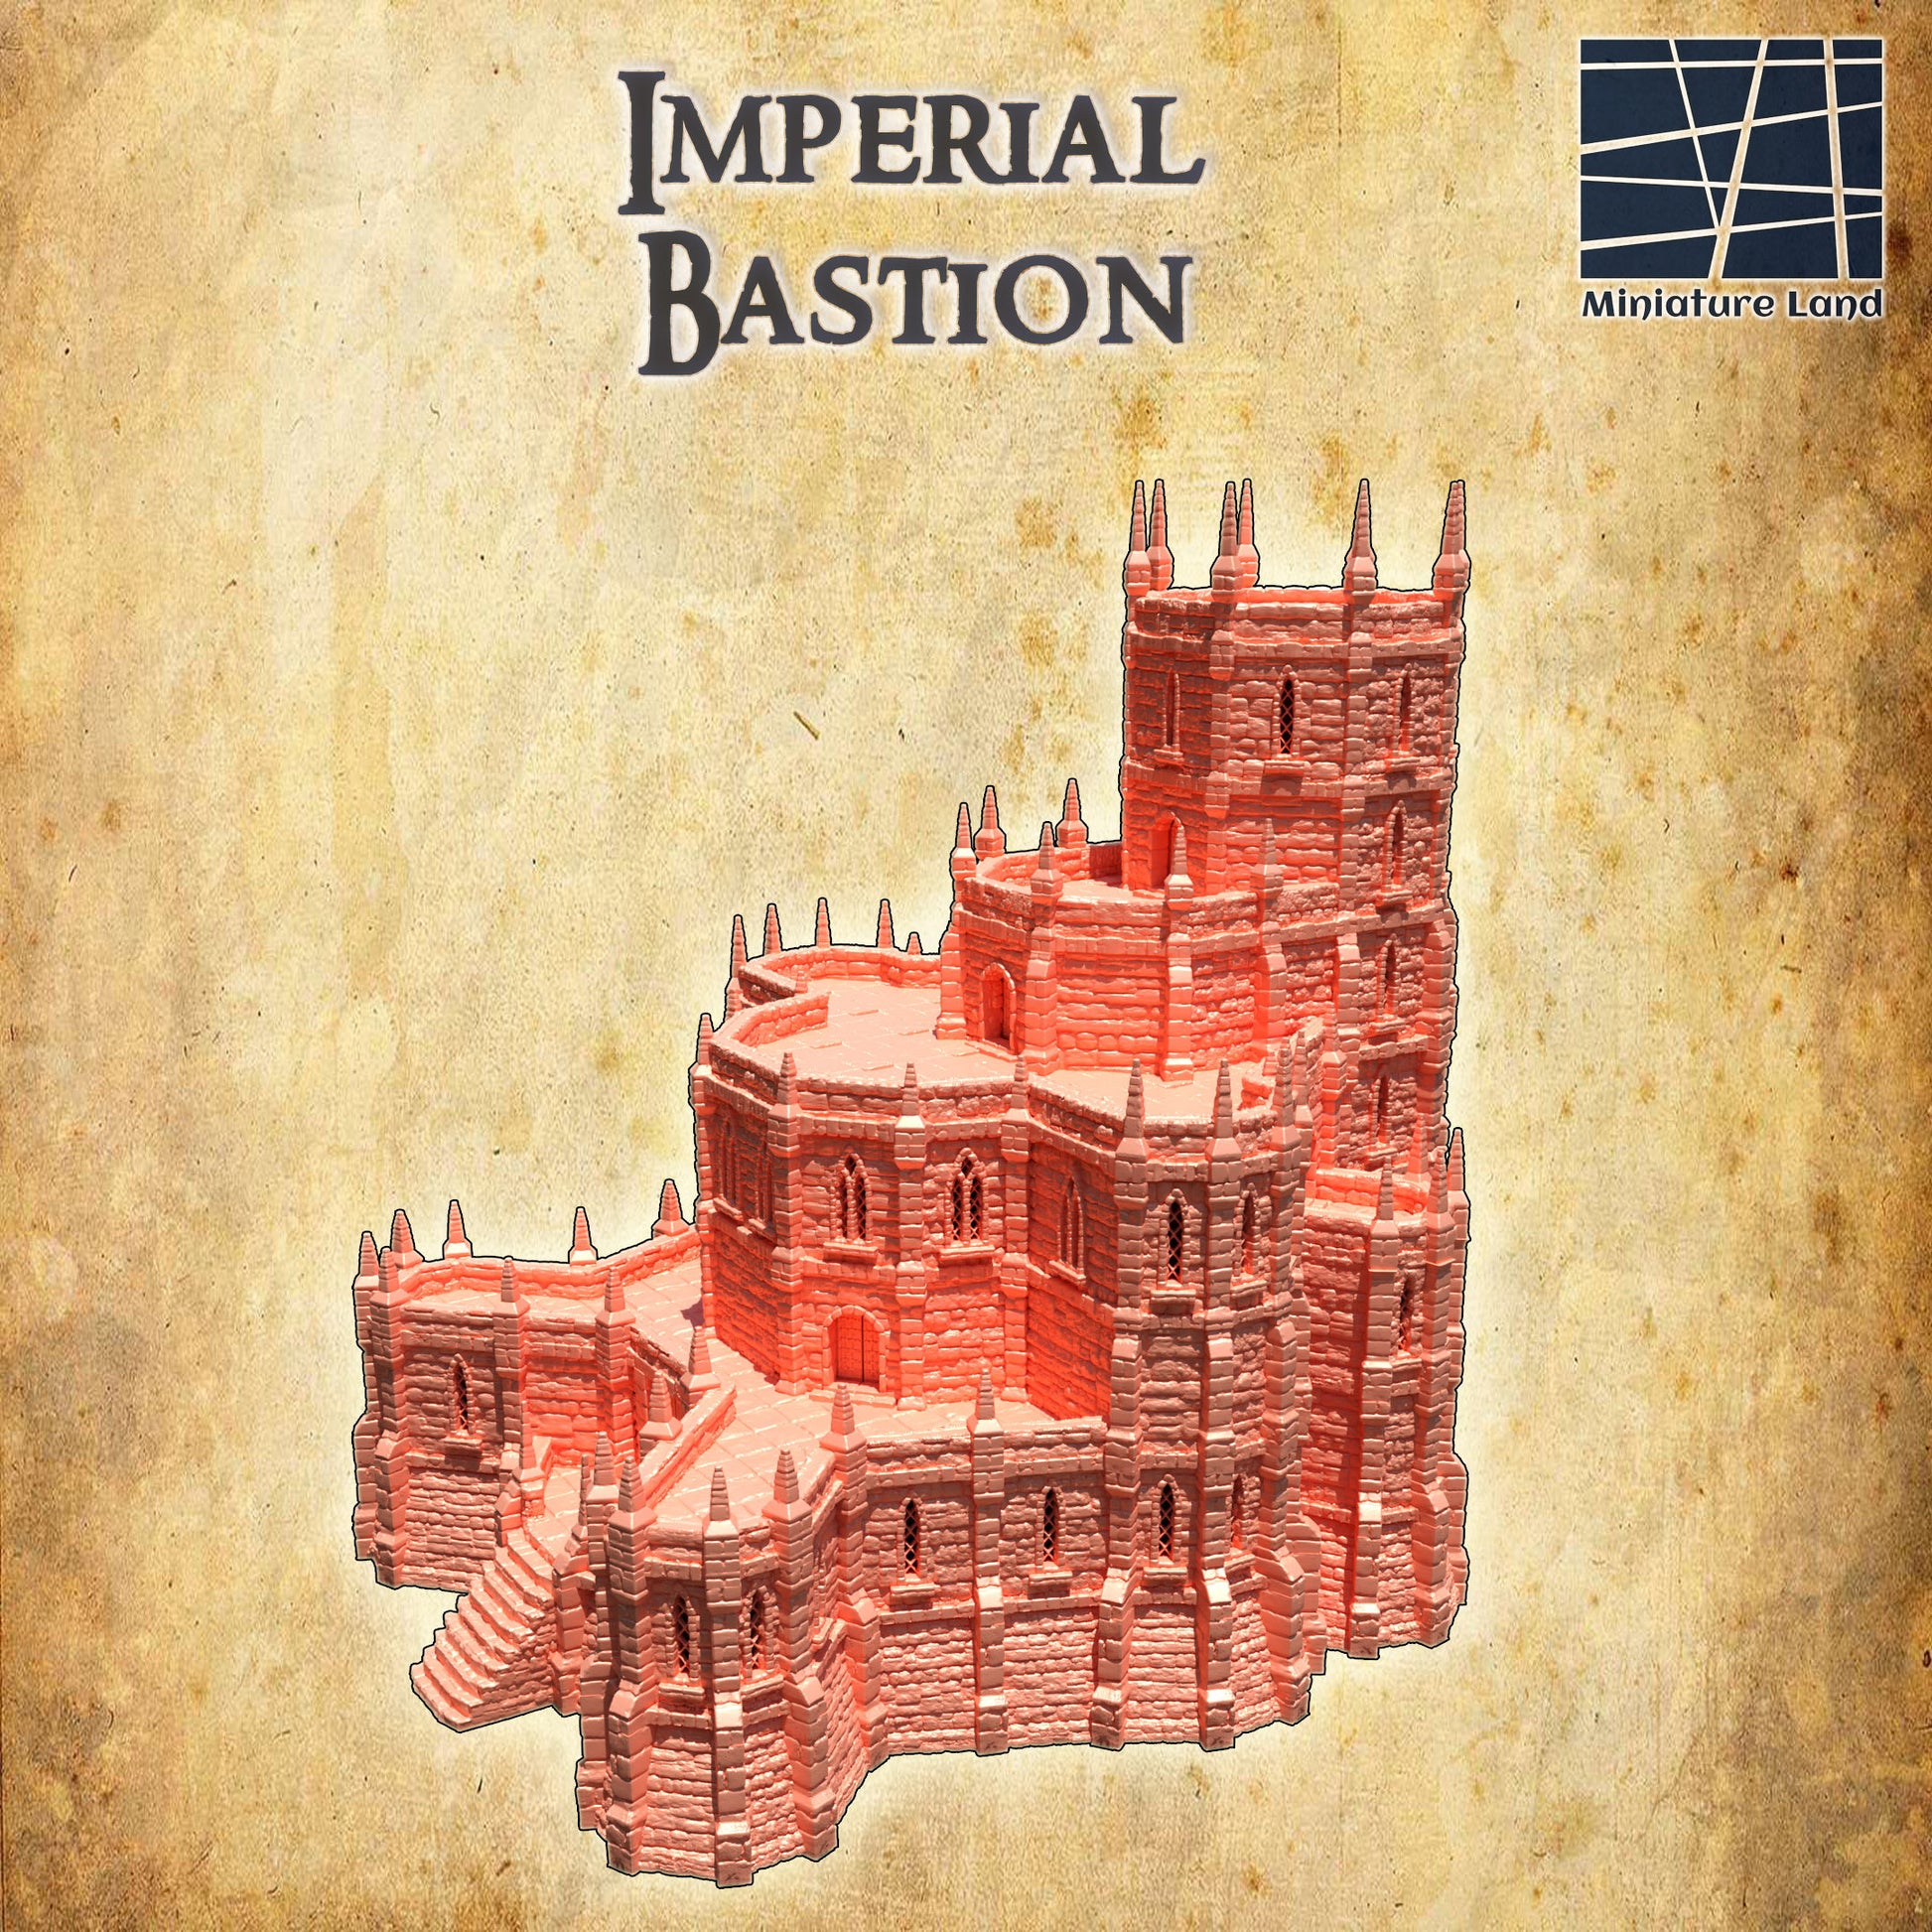 Imperial Bastion, Imperial Keep, Castle Keep